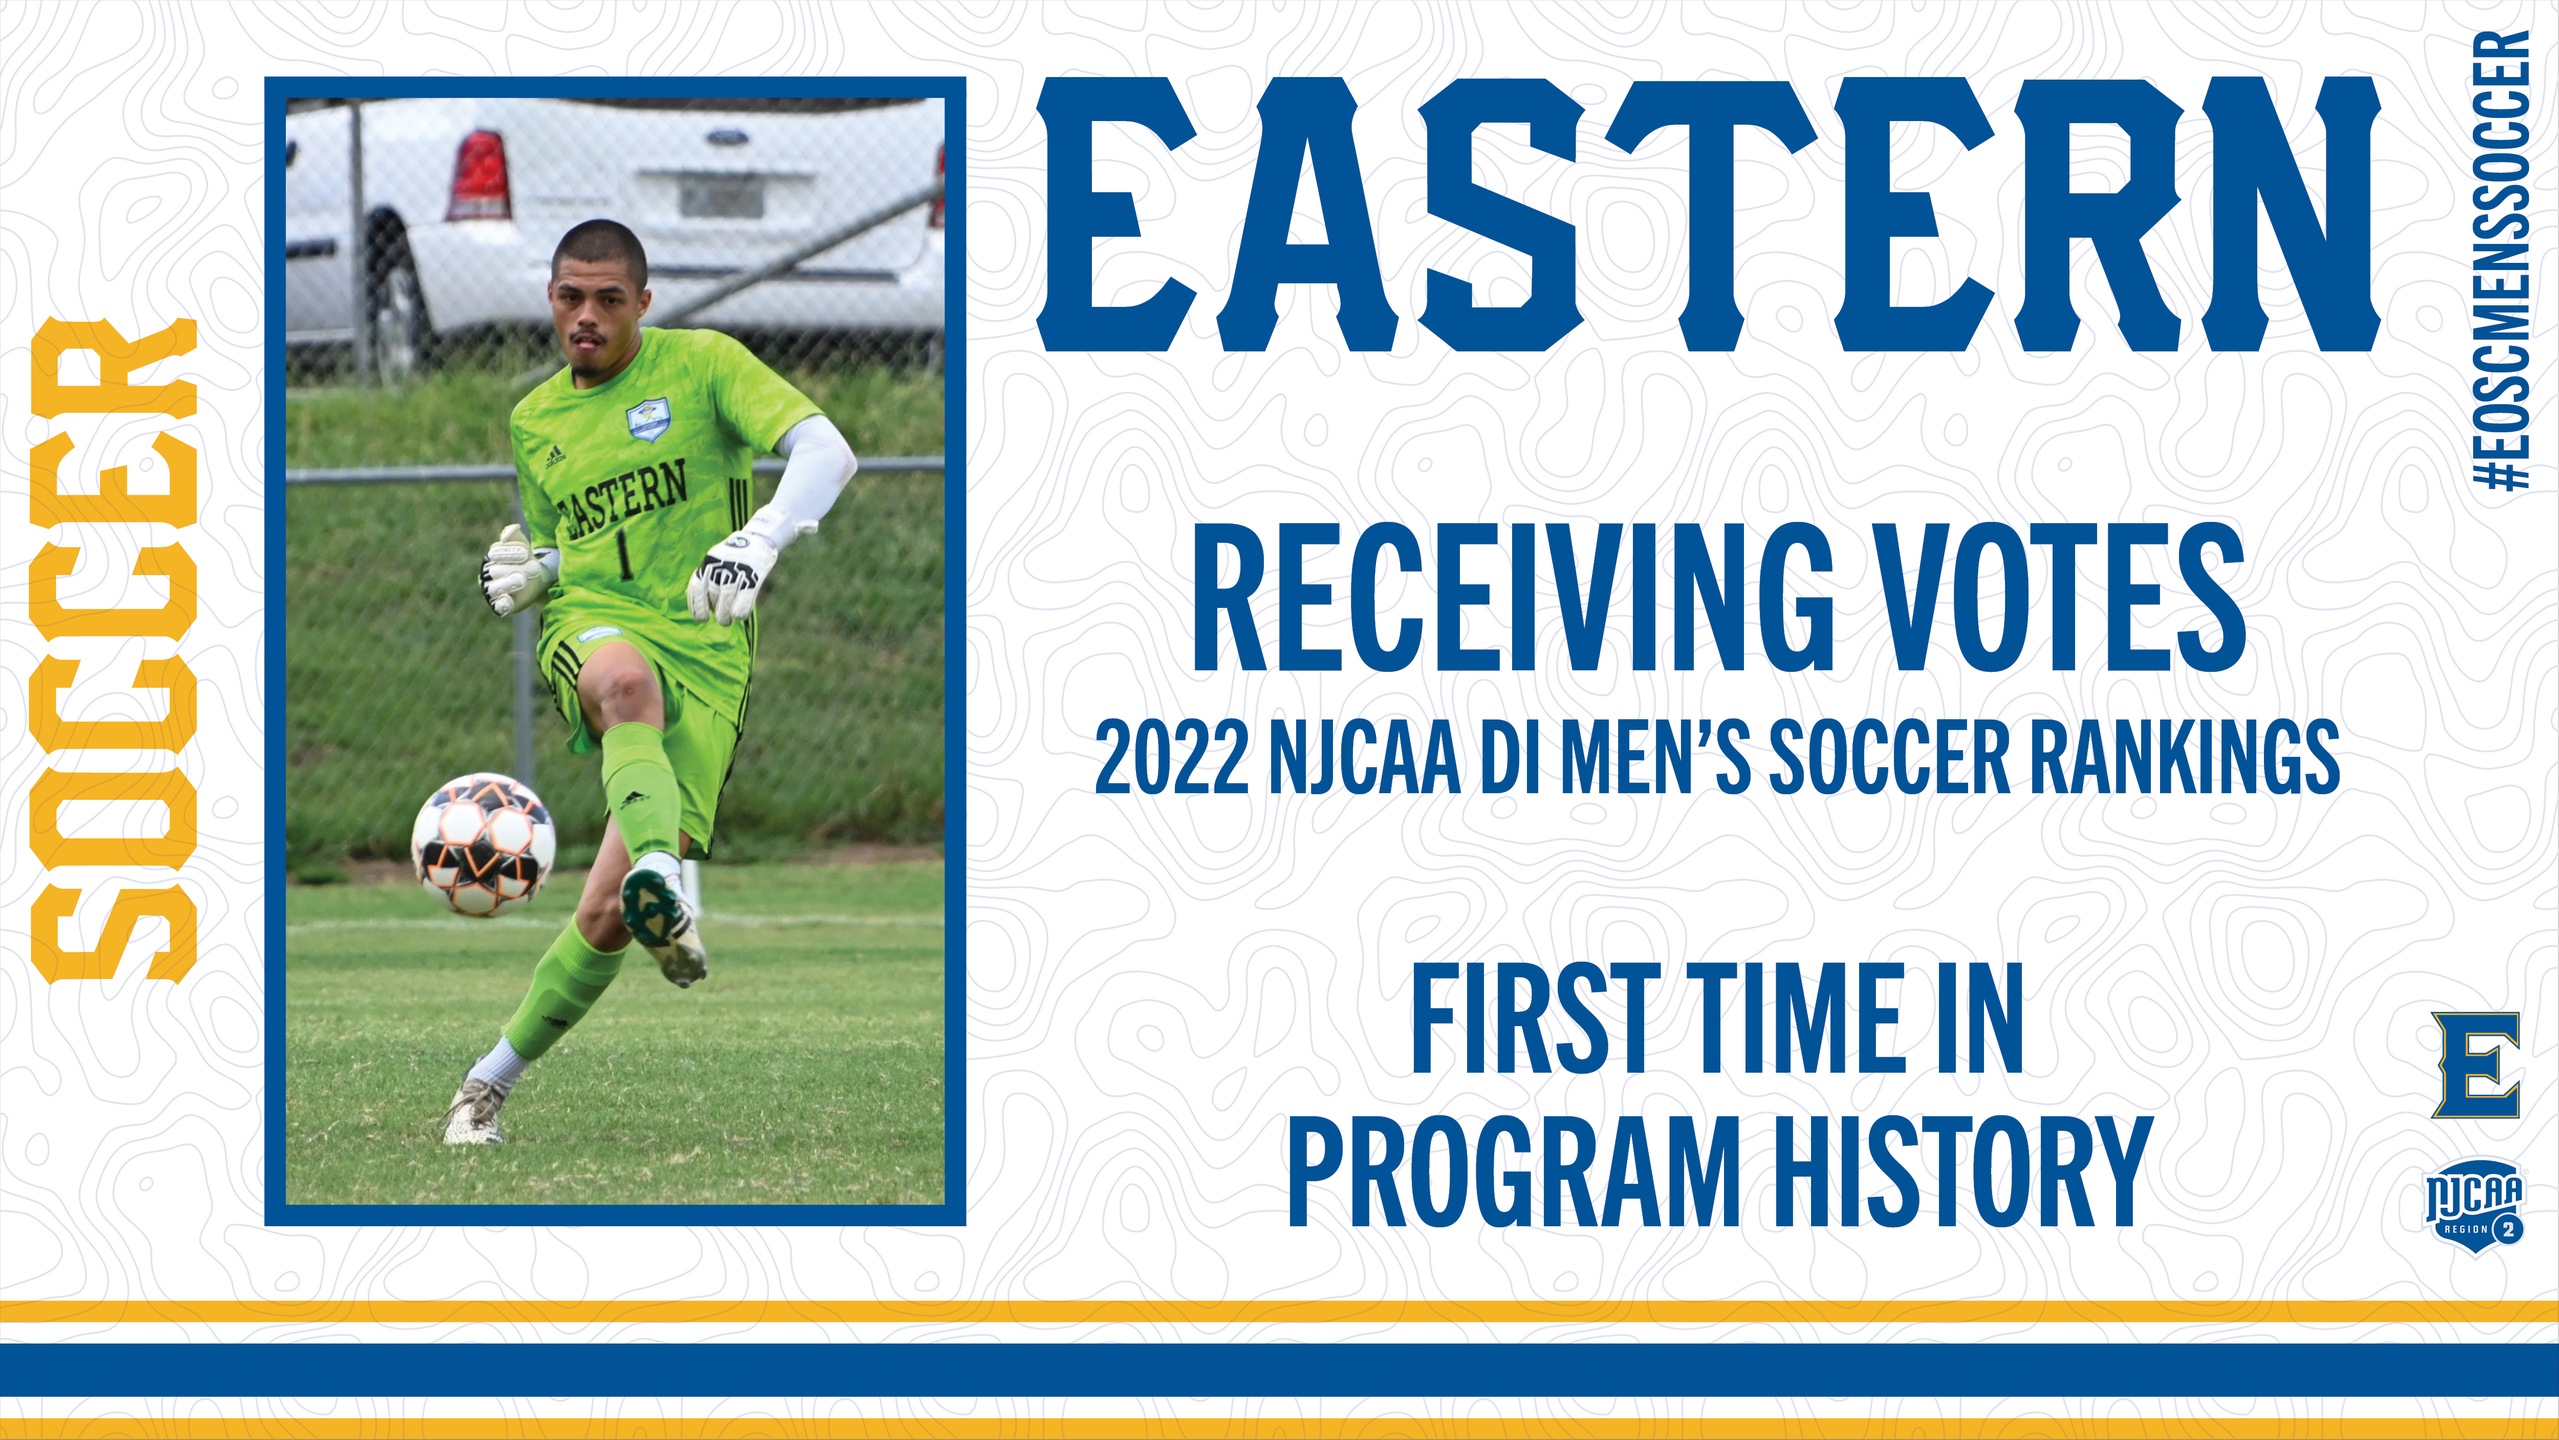 Men’s Soccer Receiving Votes for First Time in Program History